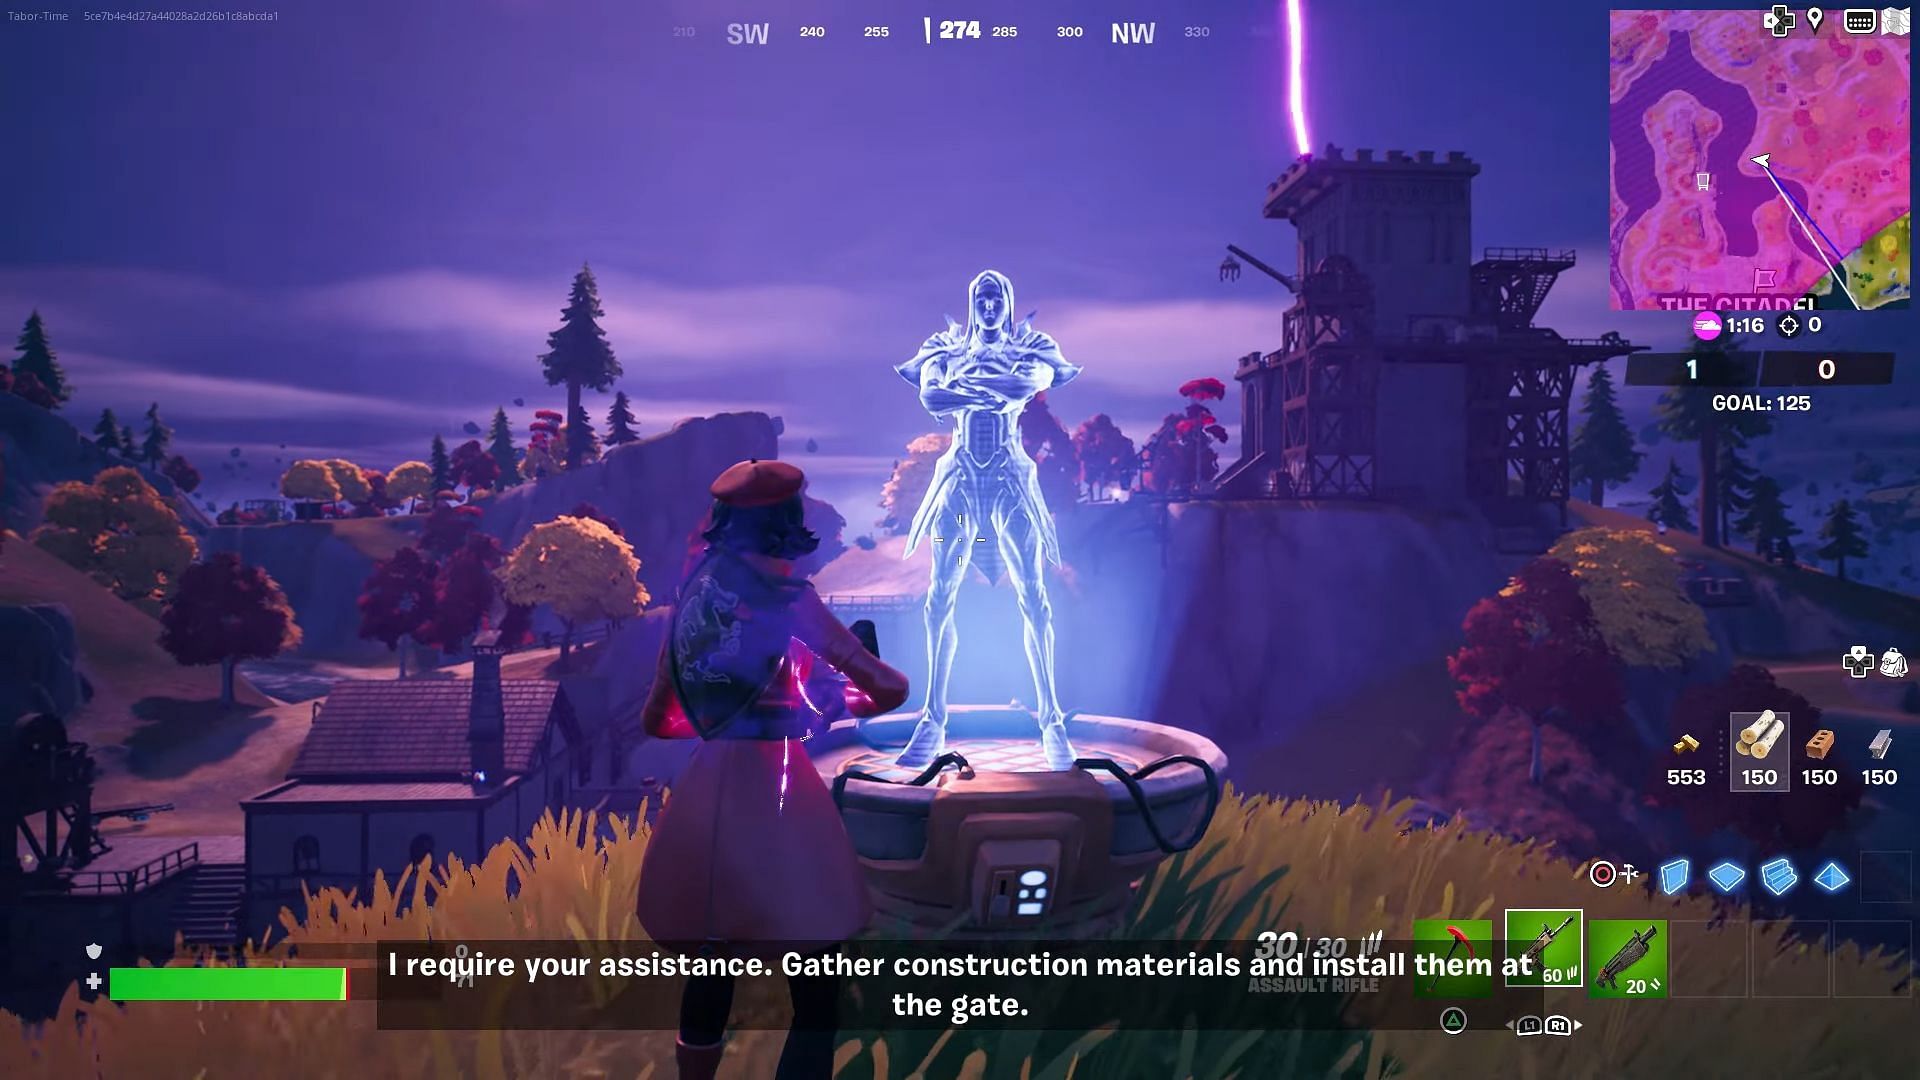 You will have to interact with a hologram to begin the questline (Image via Epic Games)